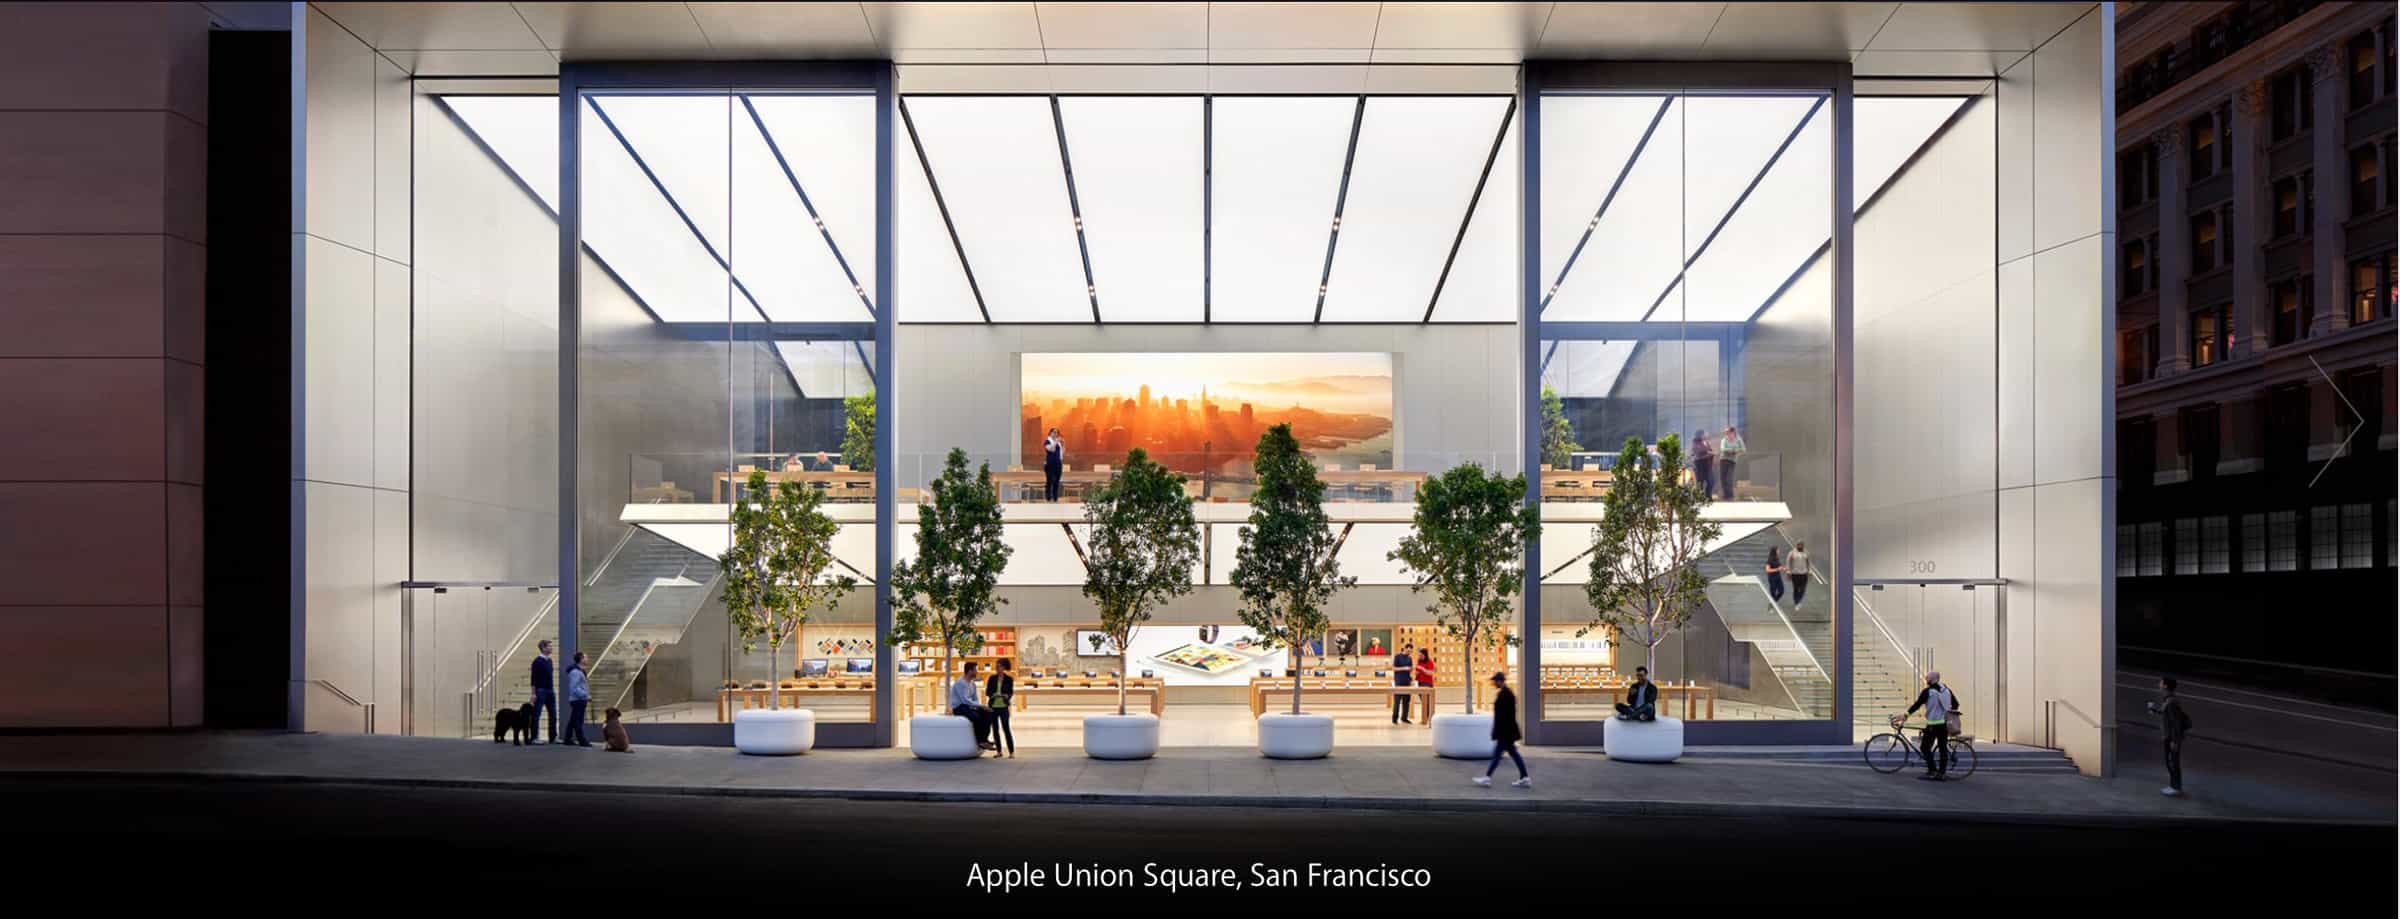 Ageism Is Not an Institutional Problem at Apple Retail